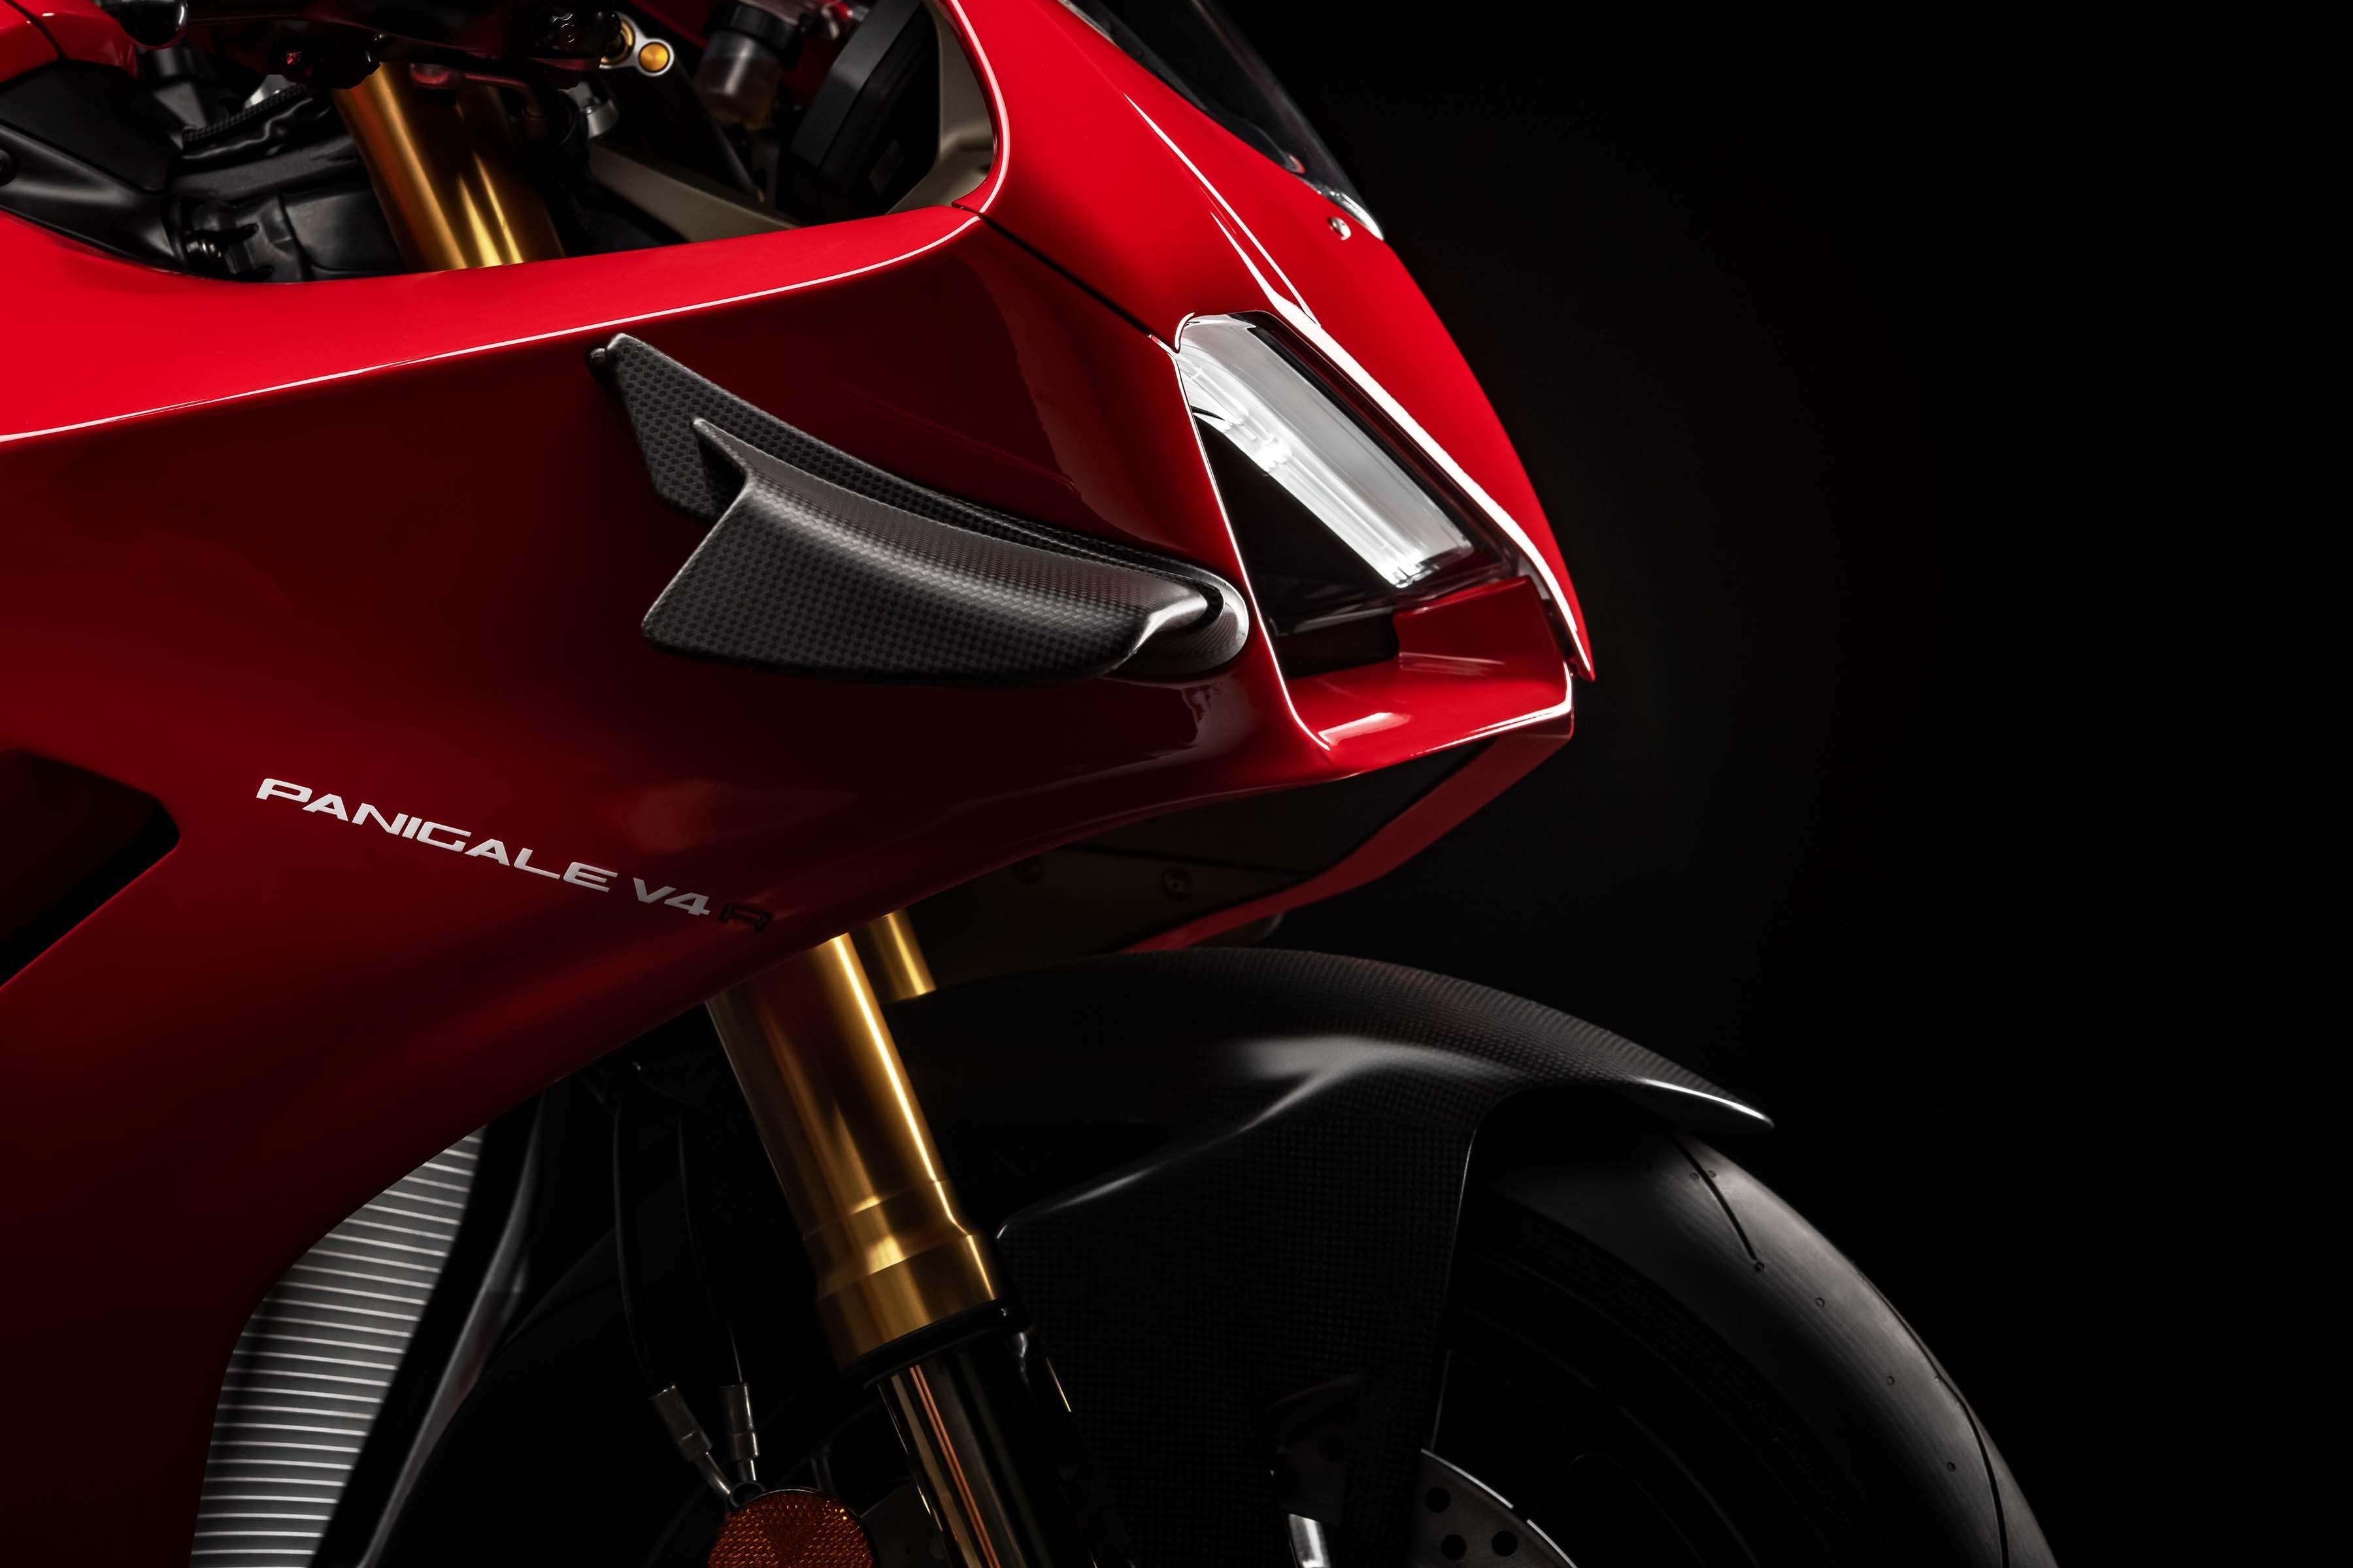 Ducati Panigale V4 R Debuts with 217hp, Wings, & More